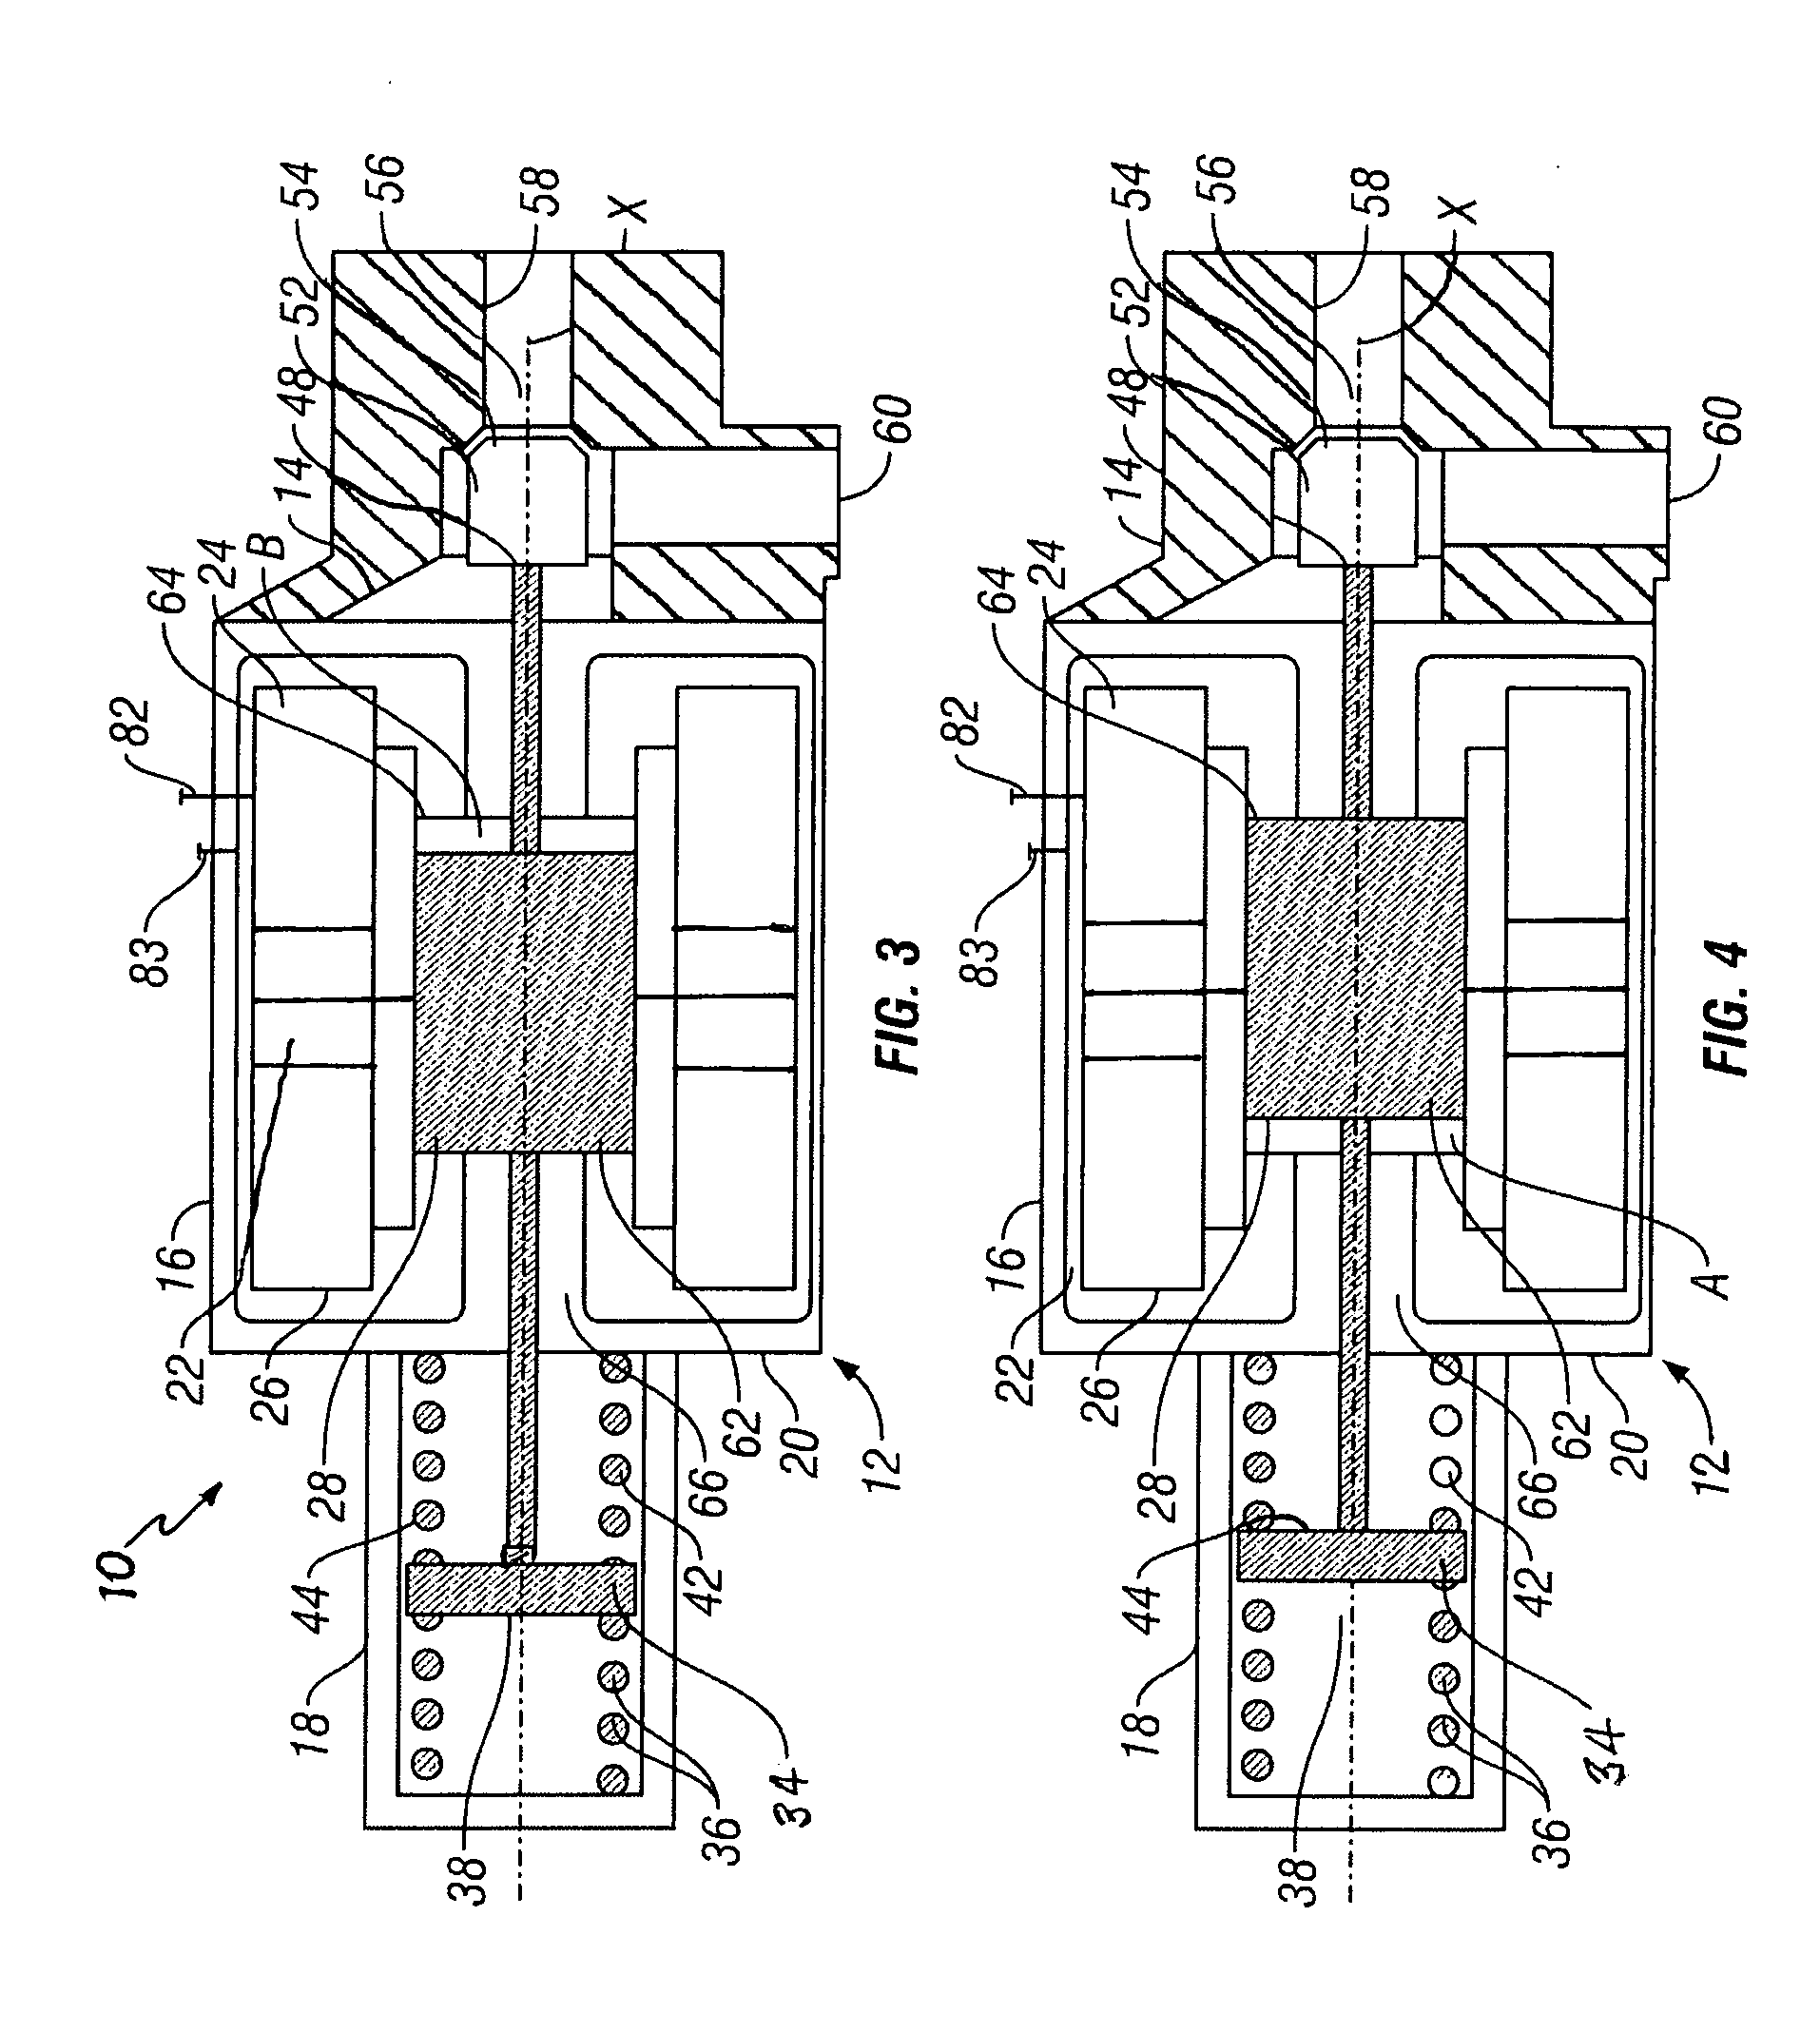 Multi-force actuator valve with multiple operating modes